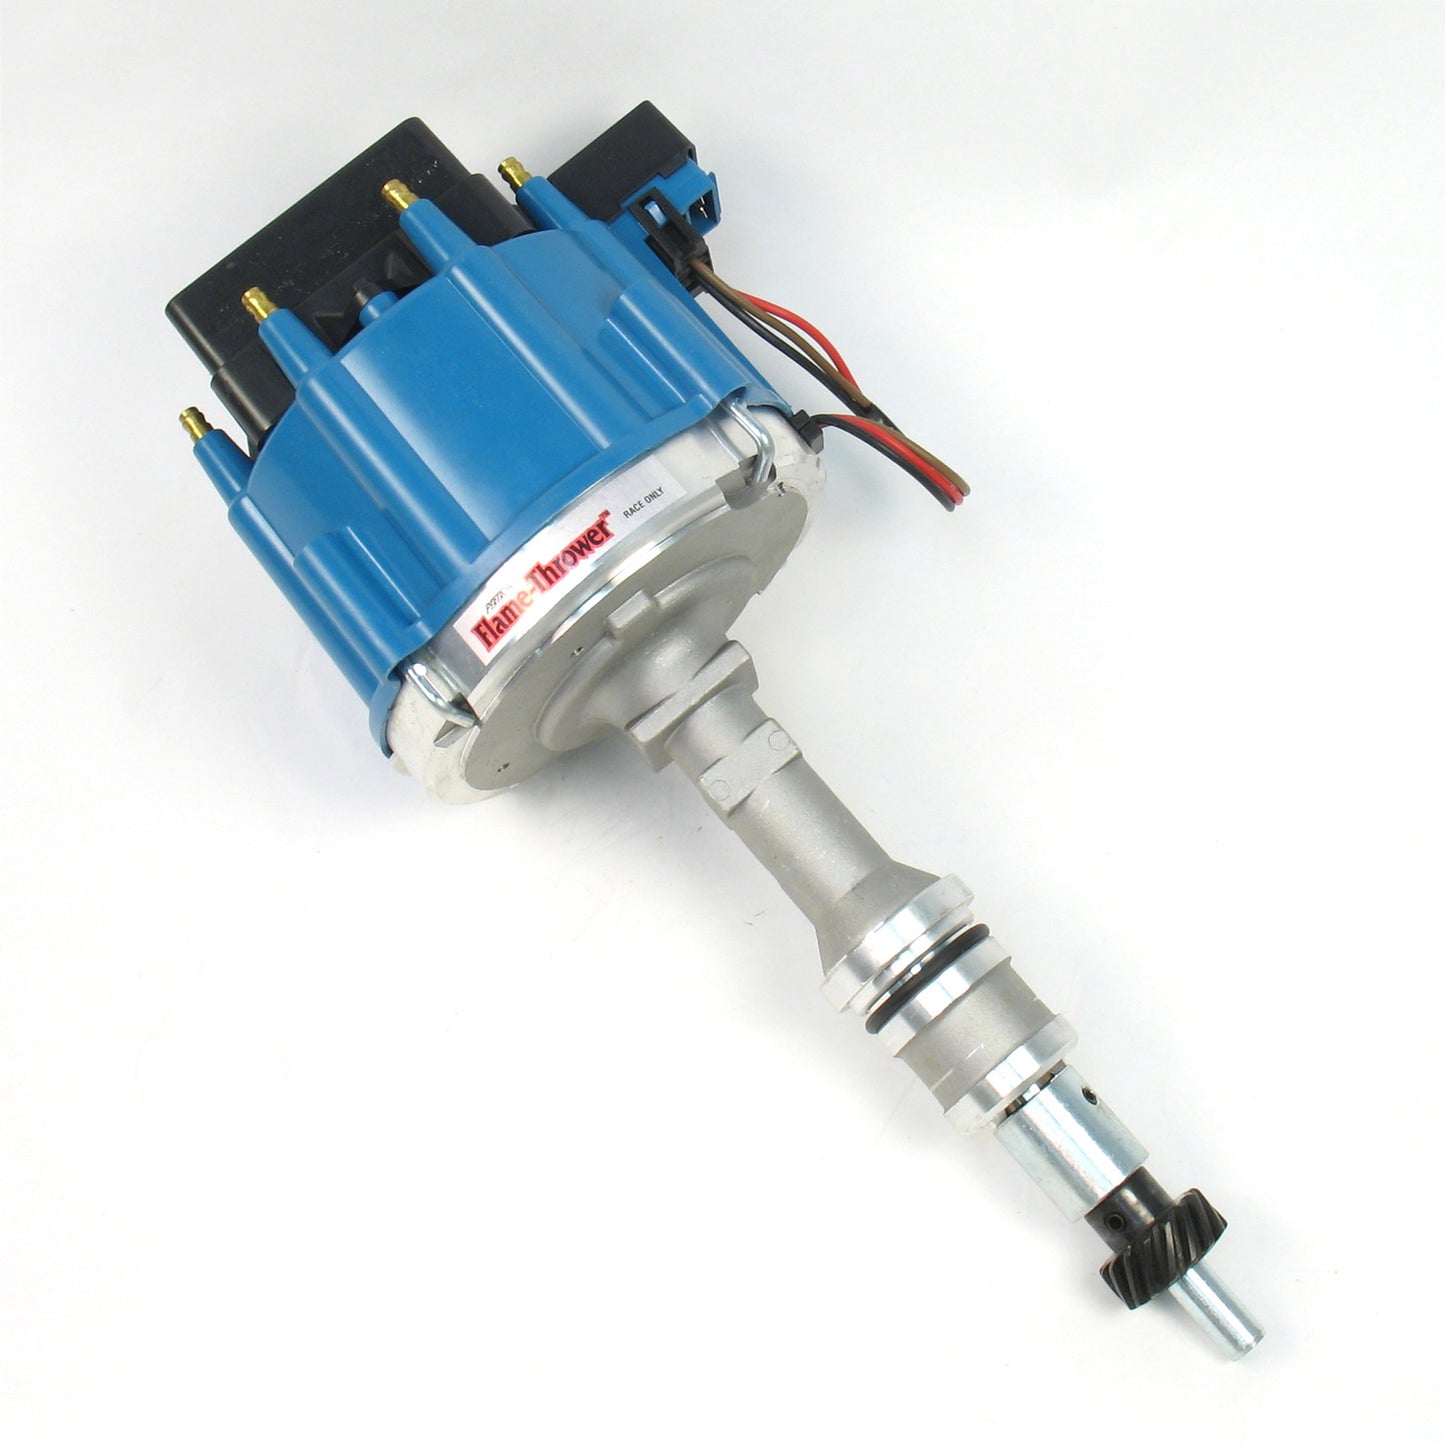 PerTronix D71372 Flame-Thrower Race Distributor HEI III Ford Small Block Blue Cap with multiple sparks and an adjustable digital rev limiter